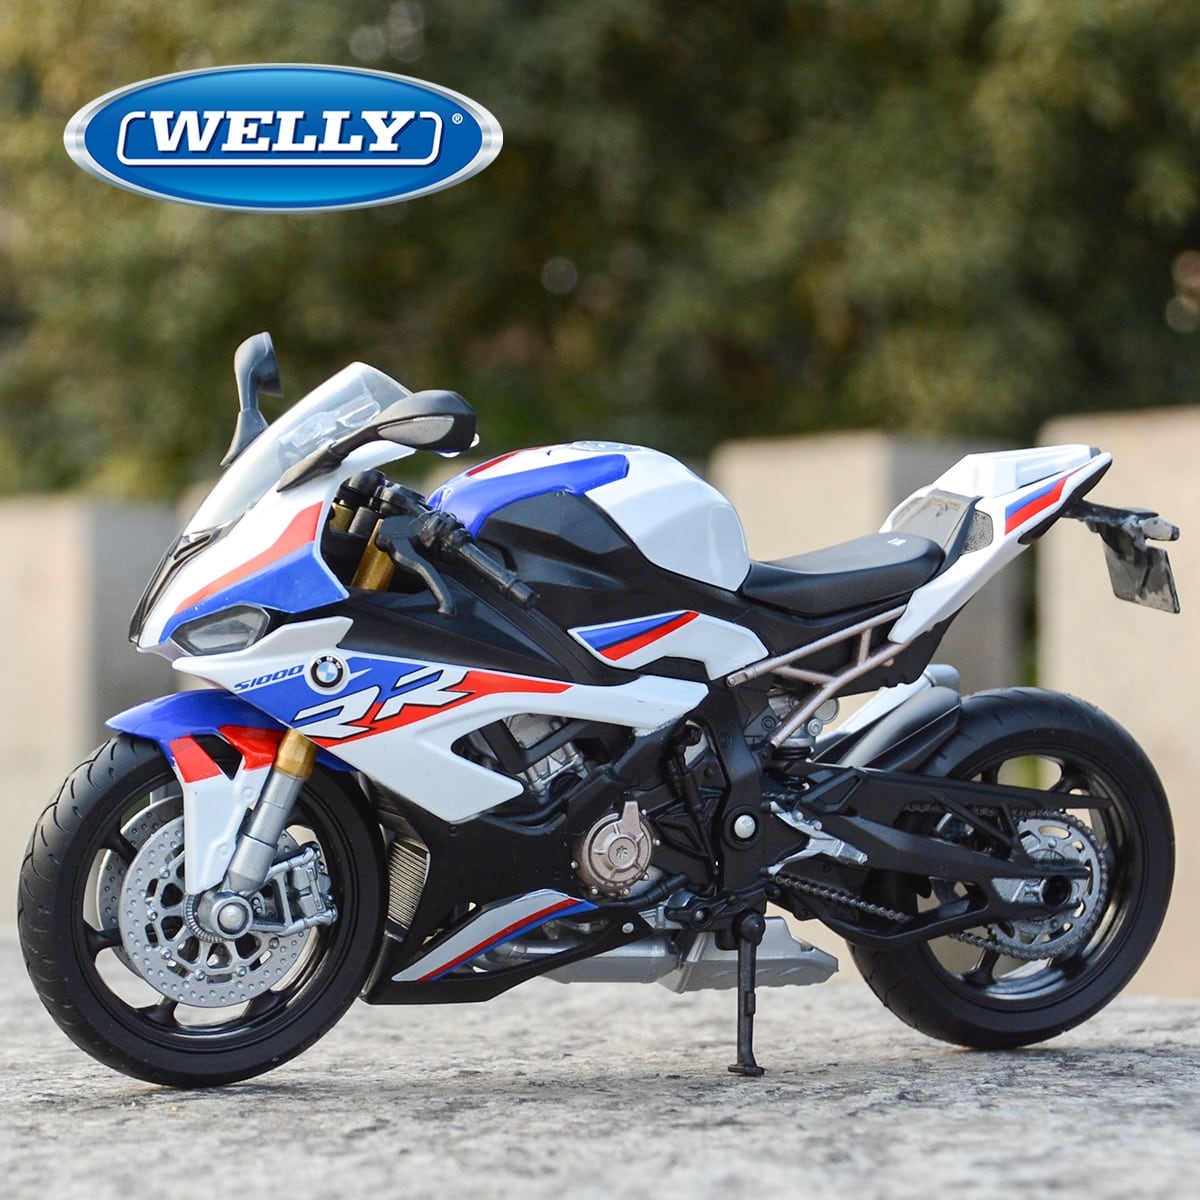 Welly 1:12 BMW 2021 S1000RR ホワイト ダイキャスト コレクション趣味 バイク模型 S223256803613964508  | e-通販 powered by BASE